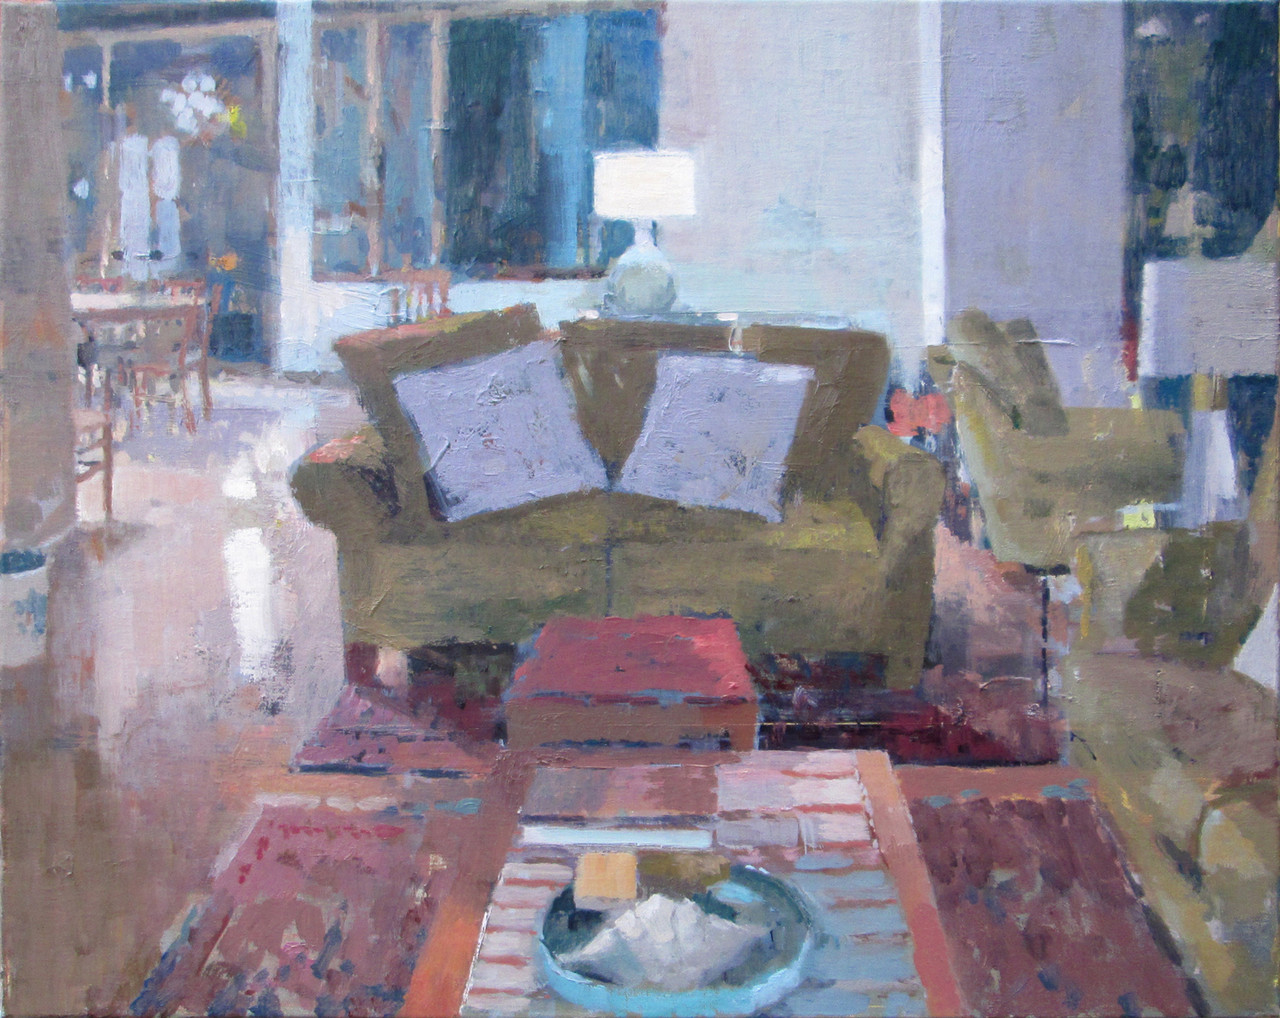 Hazy painting of an interior space with a coffee table in the foreground and a sofa on the bottom right and center, with lilac pillows. Behind is an open space with a lamp on a table, and a kitchen table with chairs to the far back left.